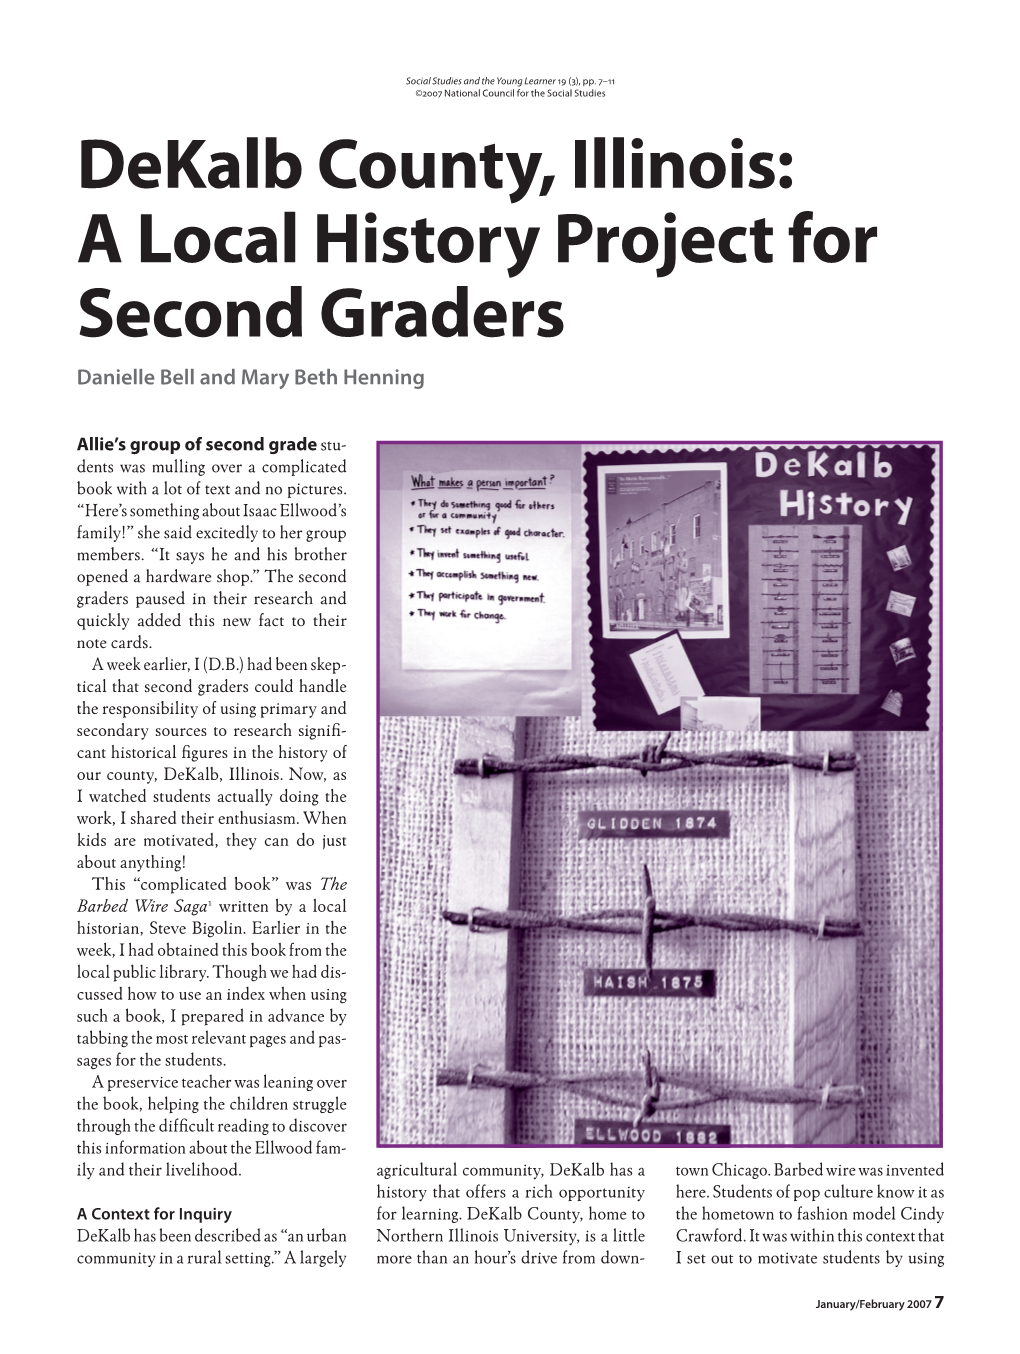 Dekalb County, Illinois: a Local History Project for Second Graders Danielle Bell and Mary Beth Henning